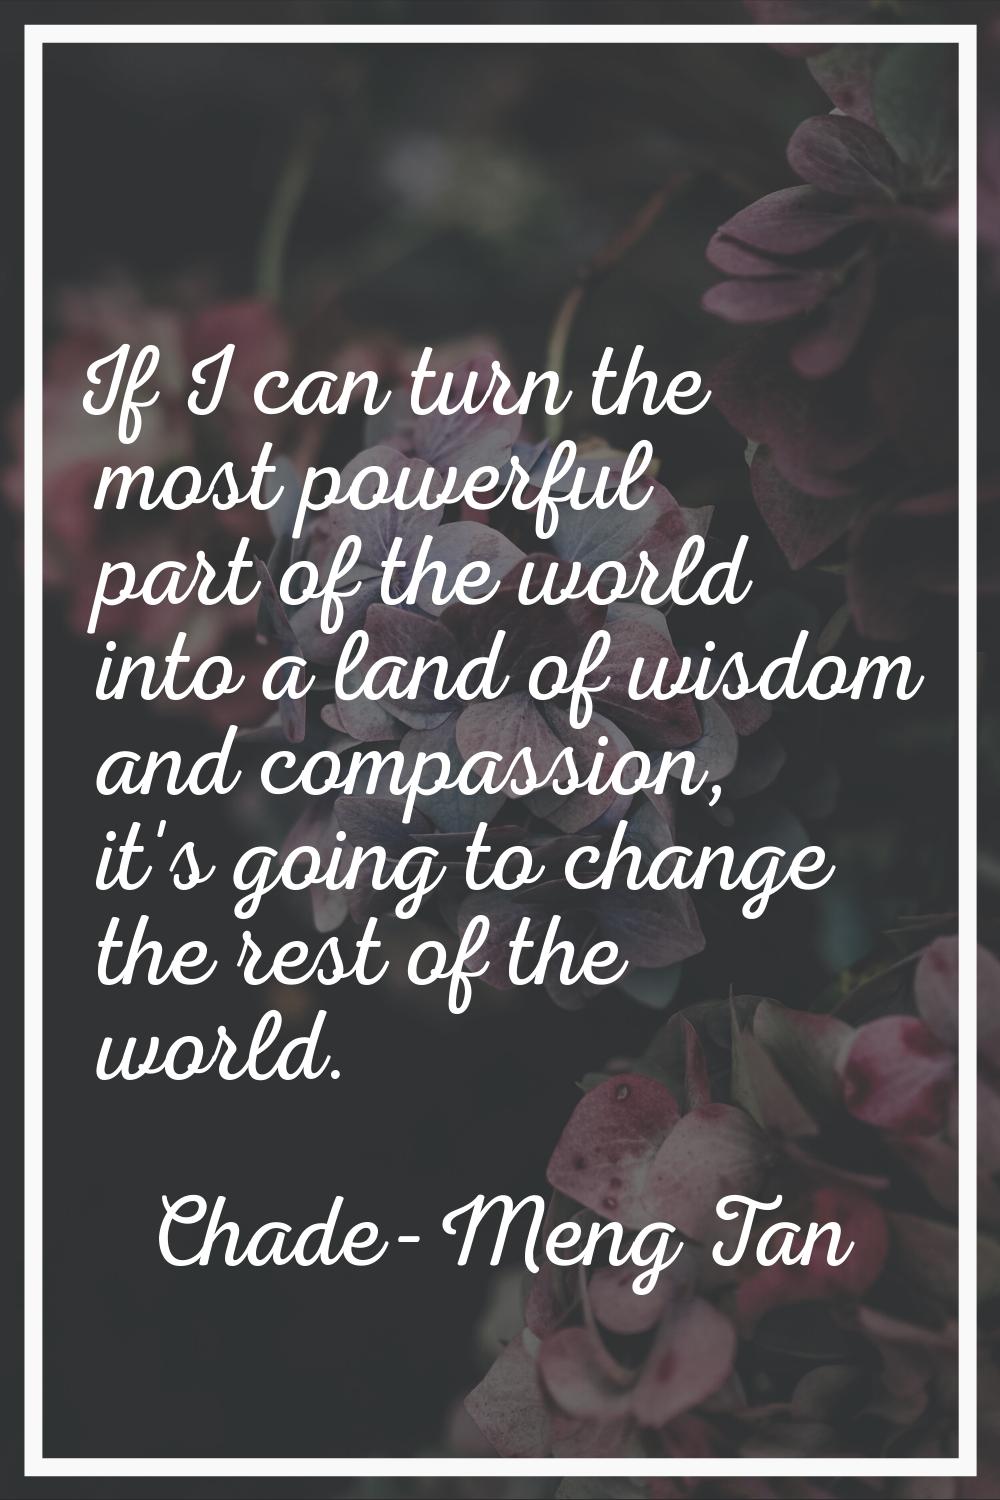 If I can turn the most powerful part of the world into a land of wisdom and compassion, it's going 